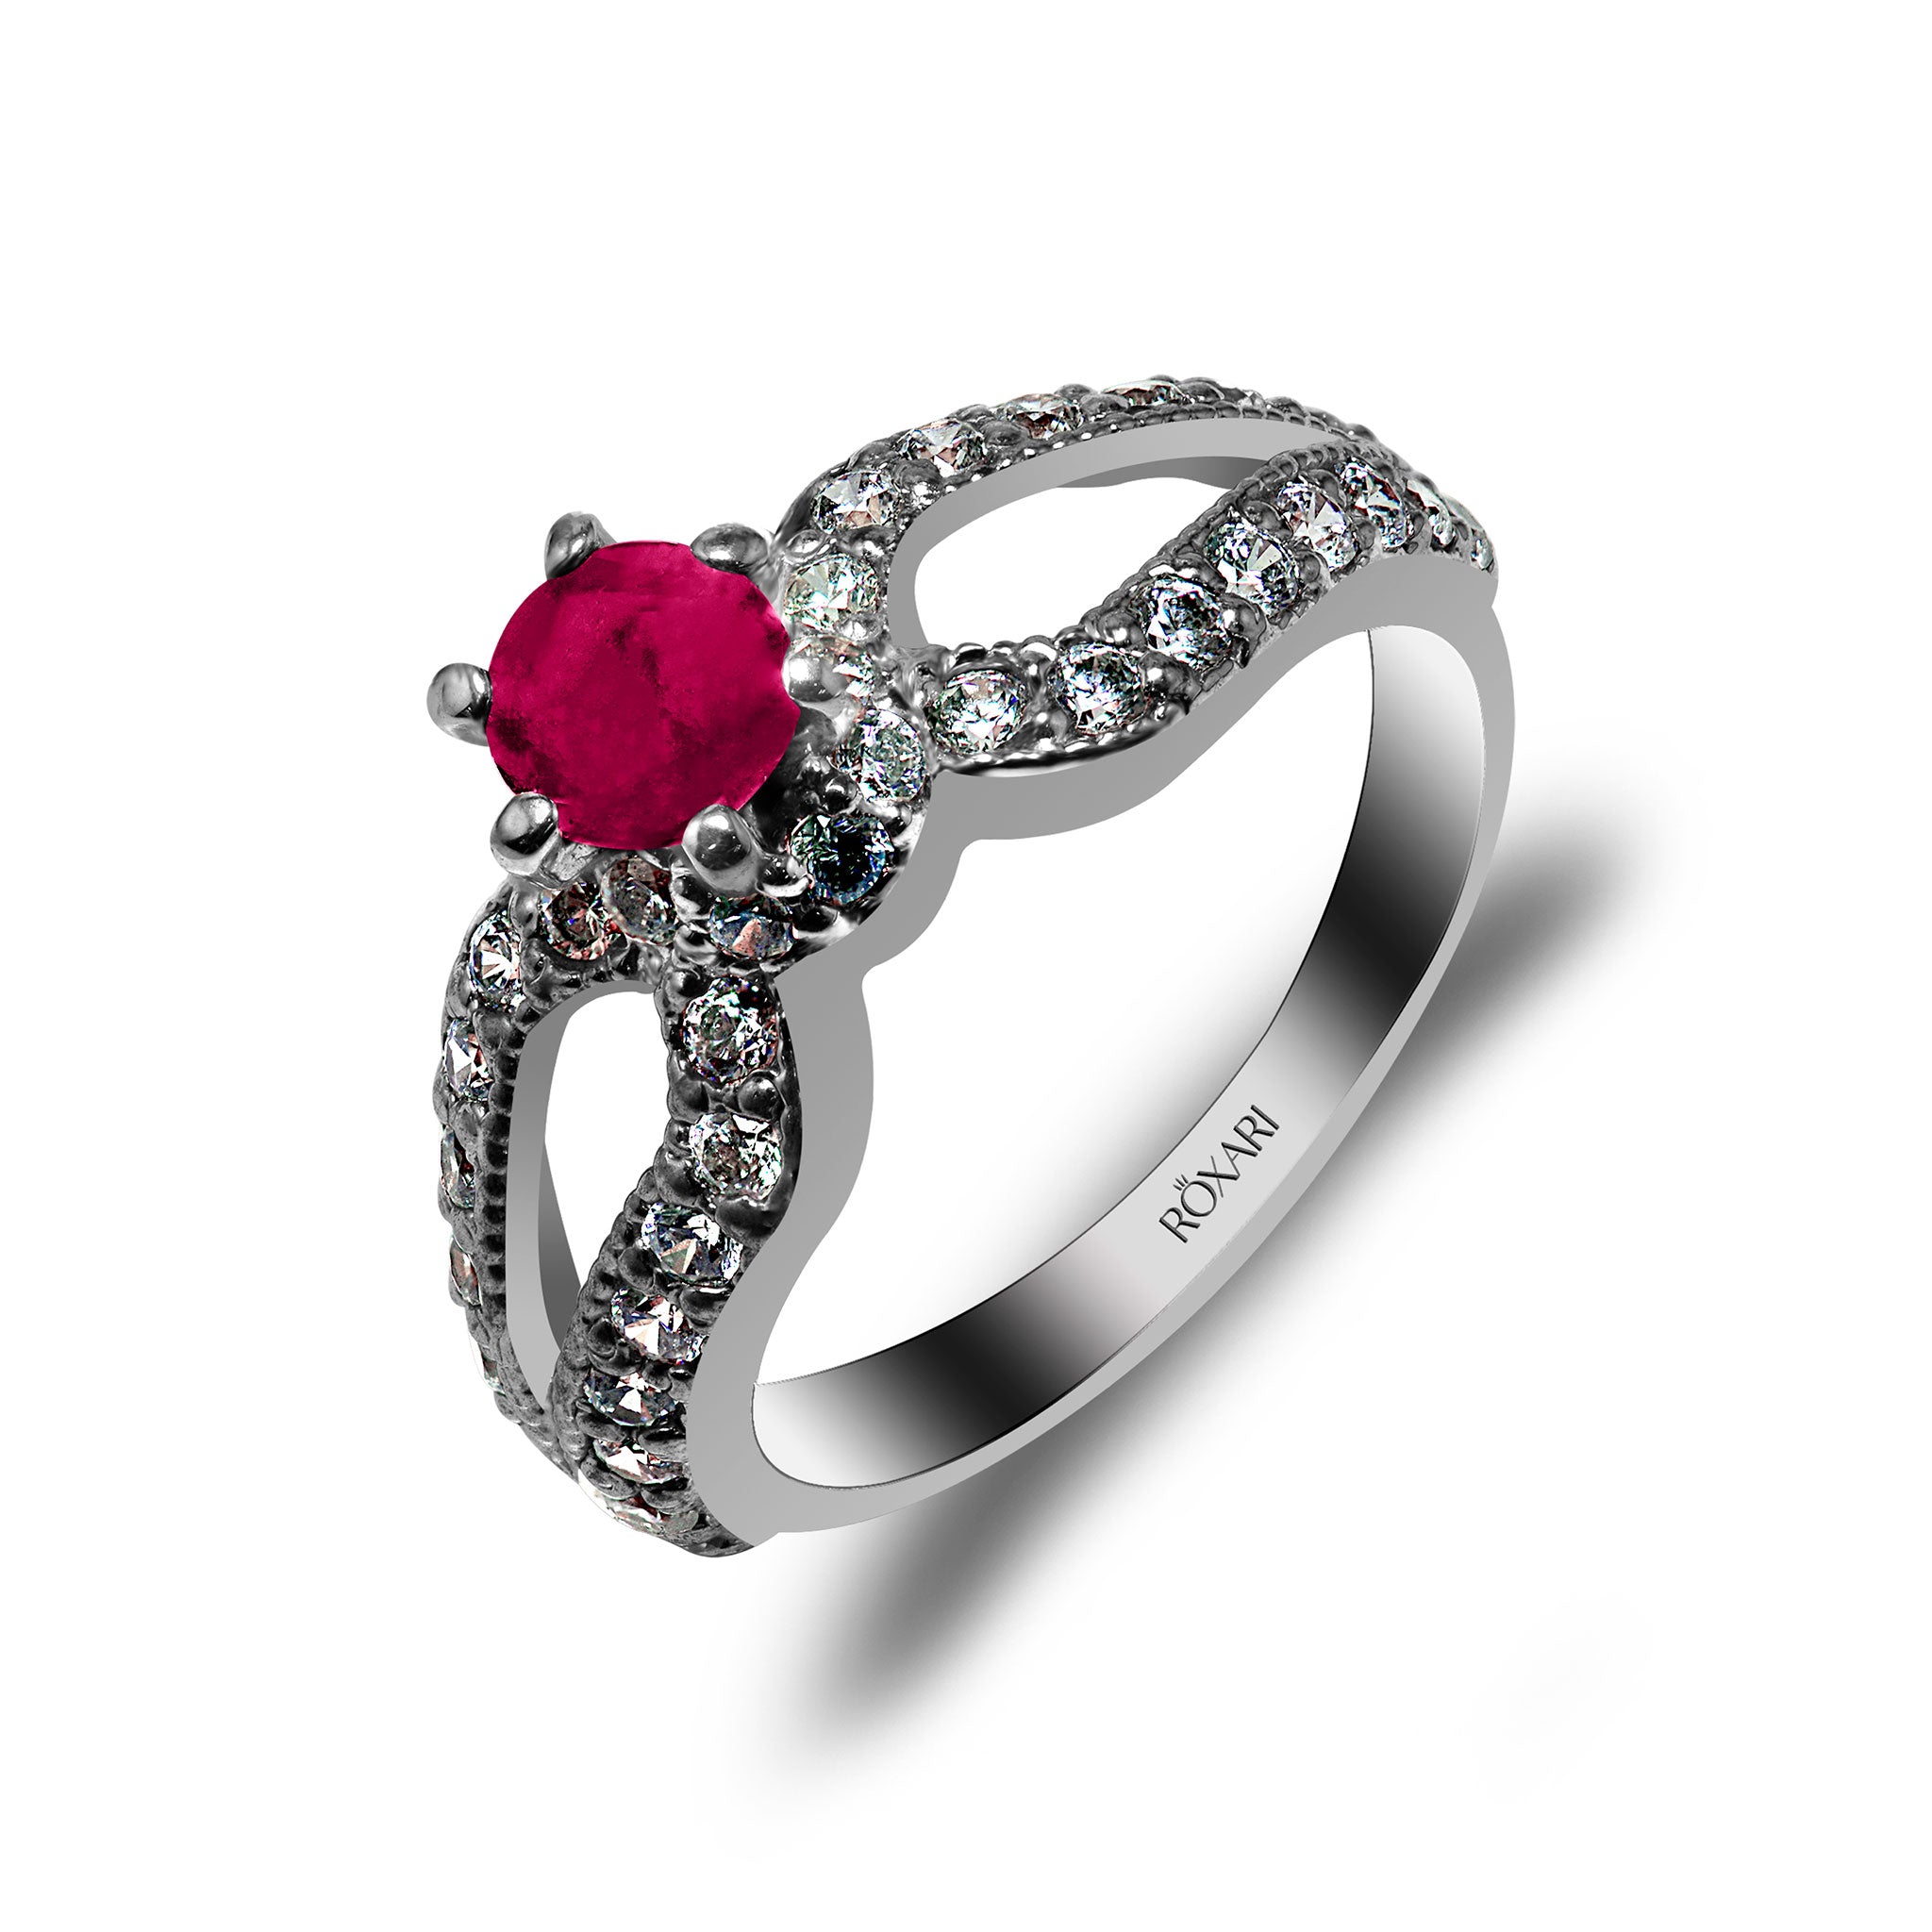 Marvellous 1.50 Carat Round Ruby and Diamond Engagement Ring for Her in 14k  White Gold affordable ruby & diamond engagement ring - Walmart.com